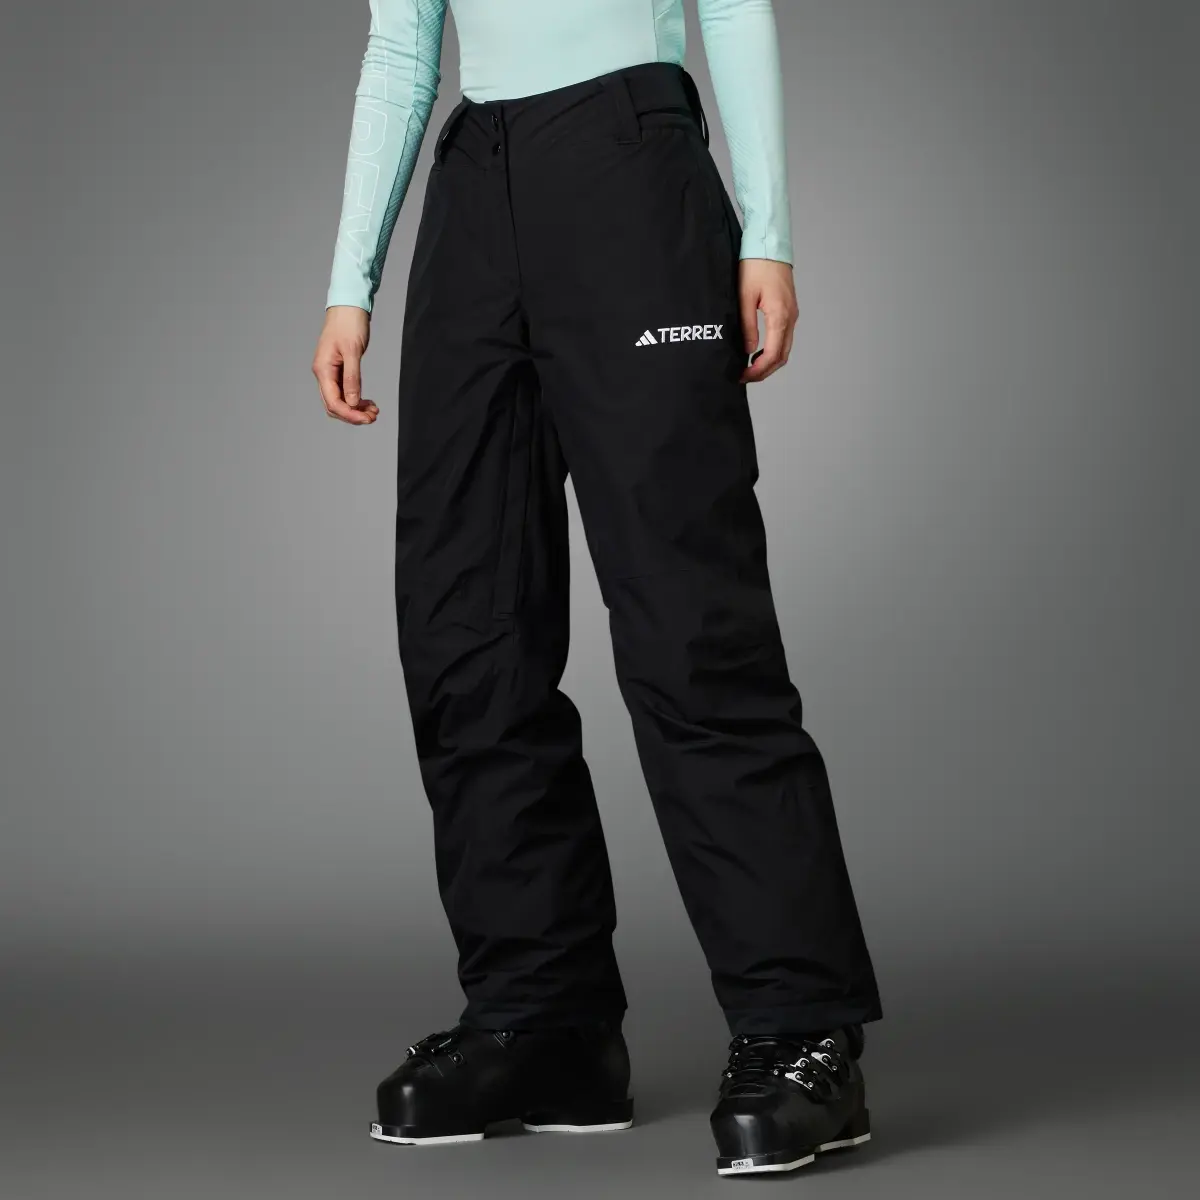 Adidas Terrex Xperior 2L Insulated Pants. 1